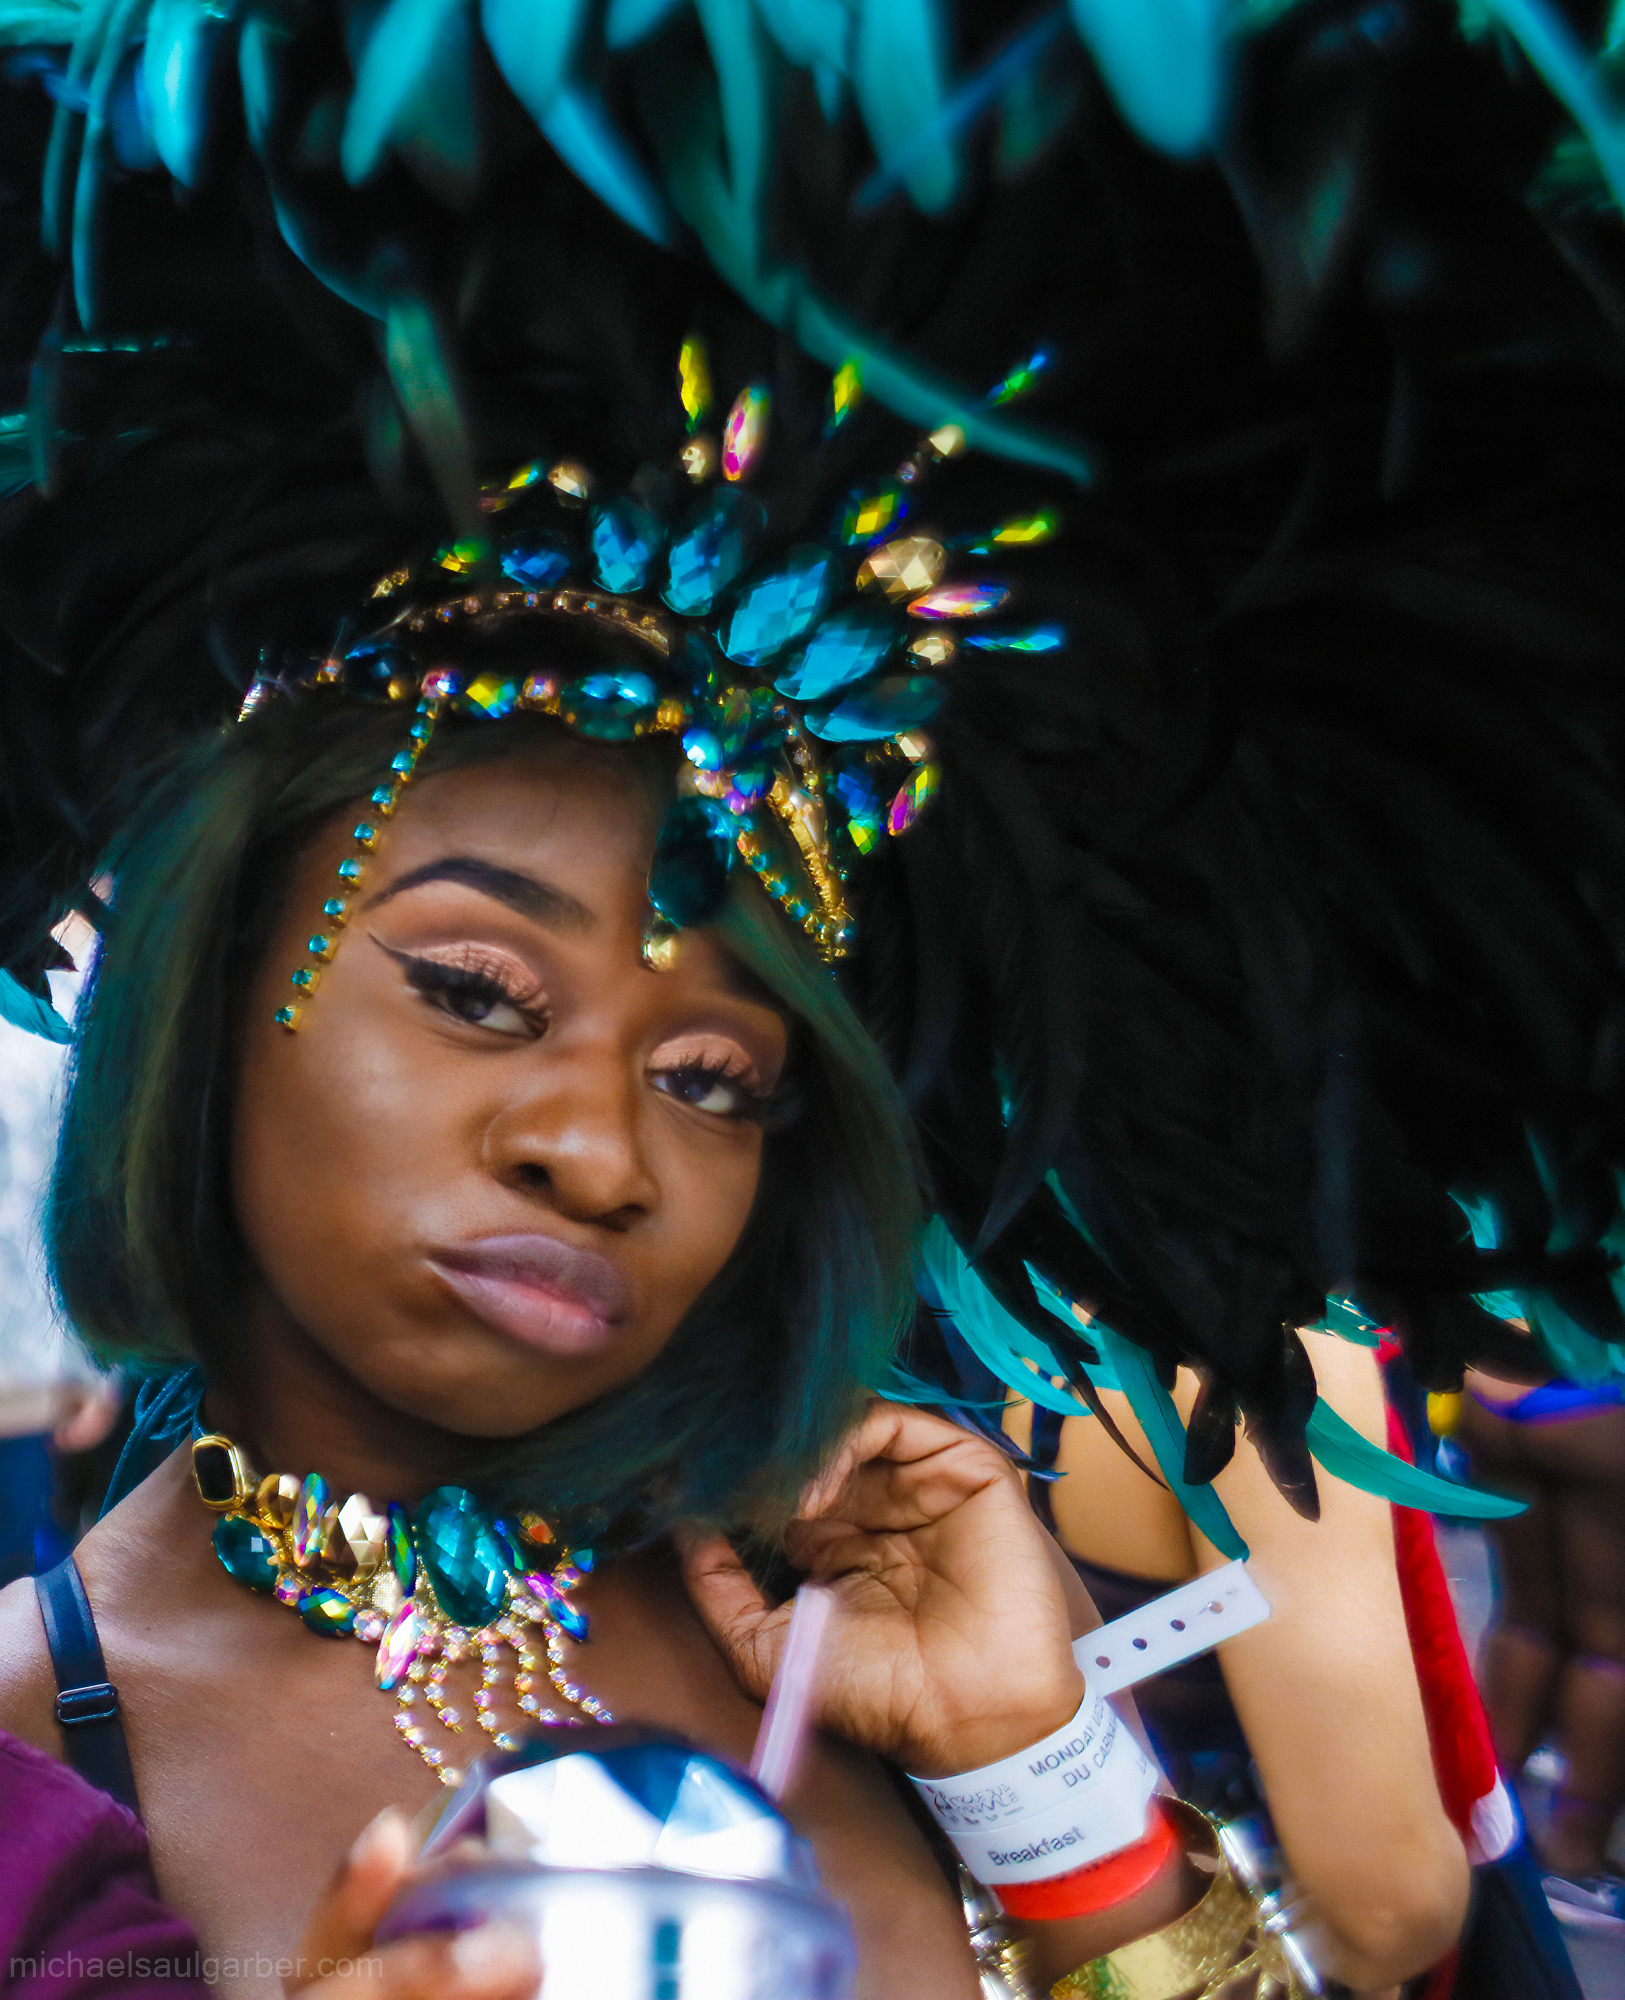 The Notting Hill Carnival attracts around a million revelers every August, Notting Hill Carnival, 2018